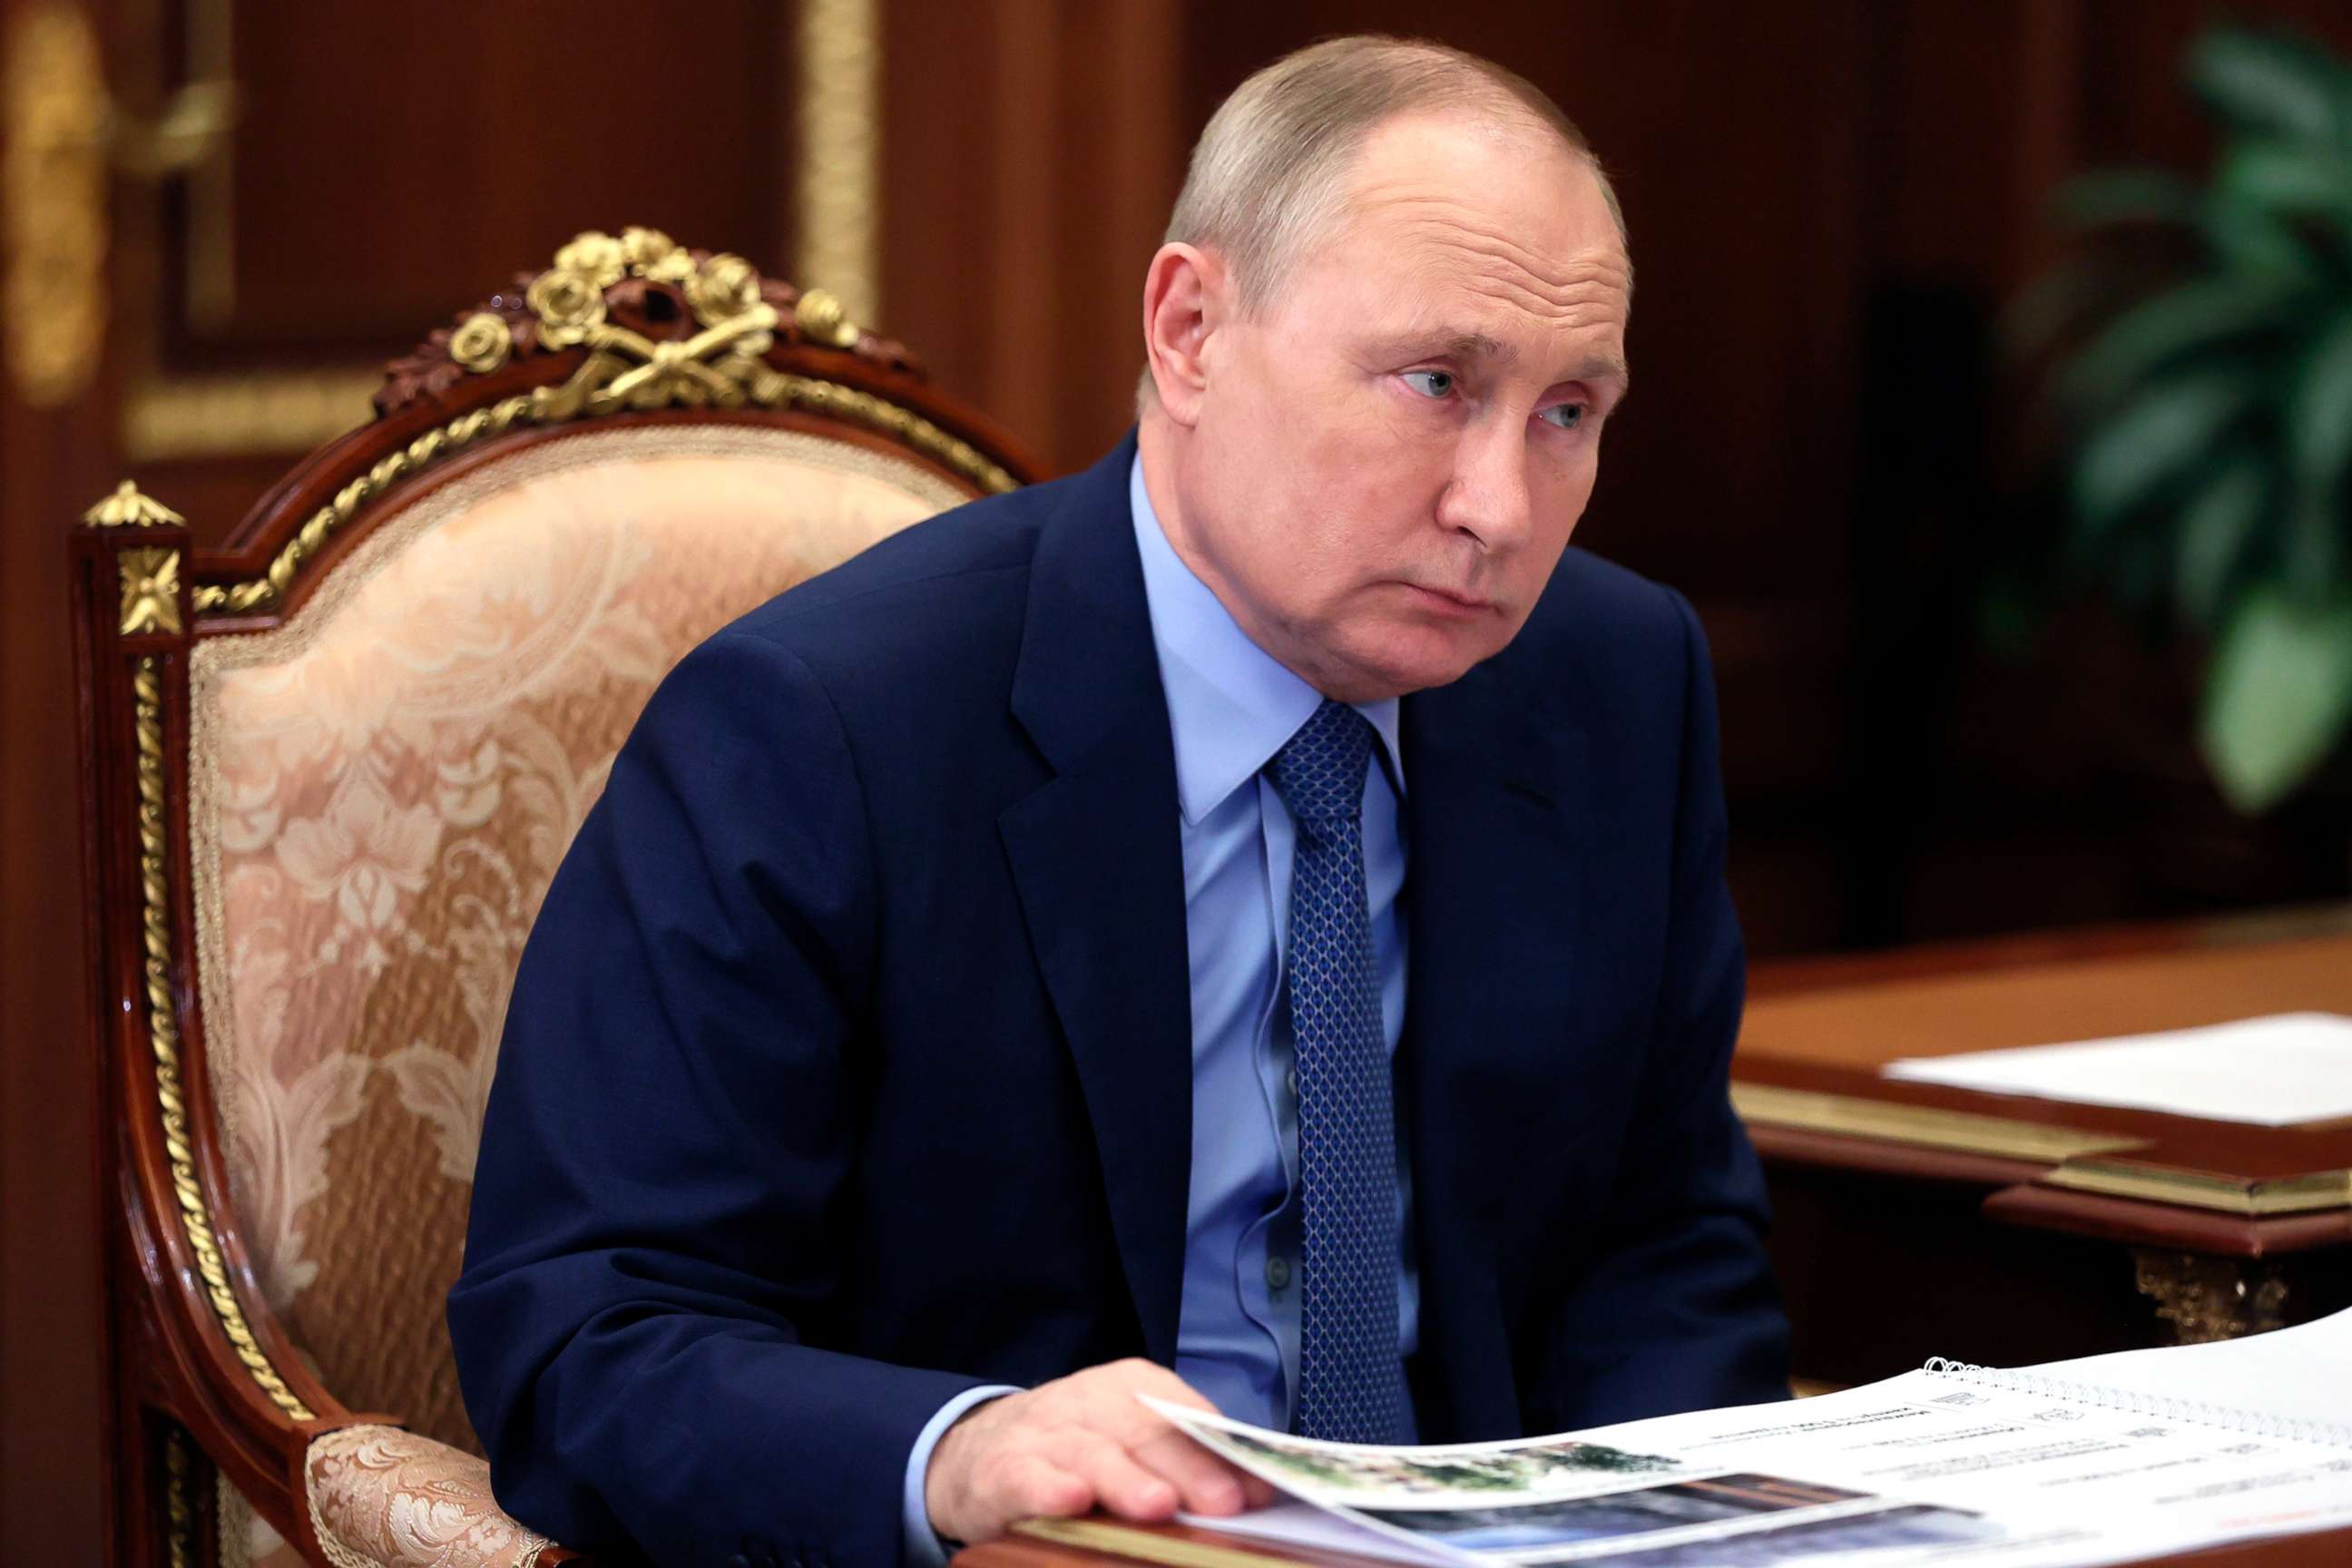 PHOTO: Russian President Vladimir Putin listens during a meeting at the Kremlin in Moscow, Jan. 14, 2022.